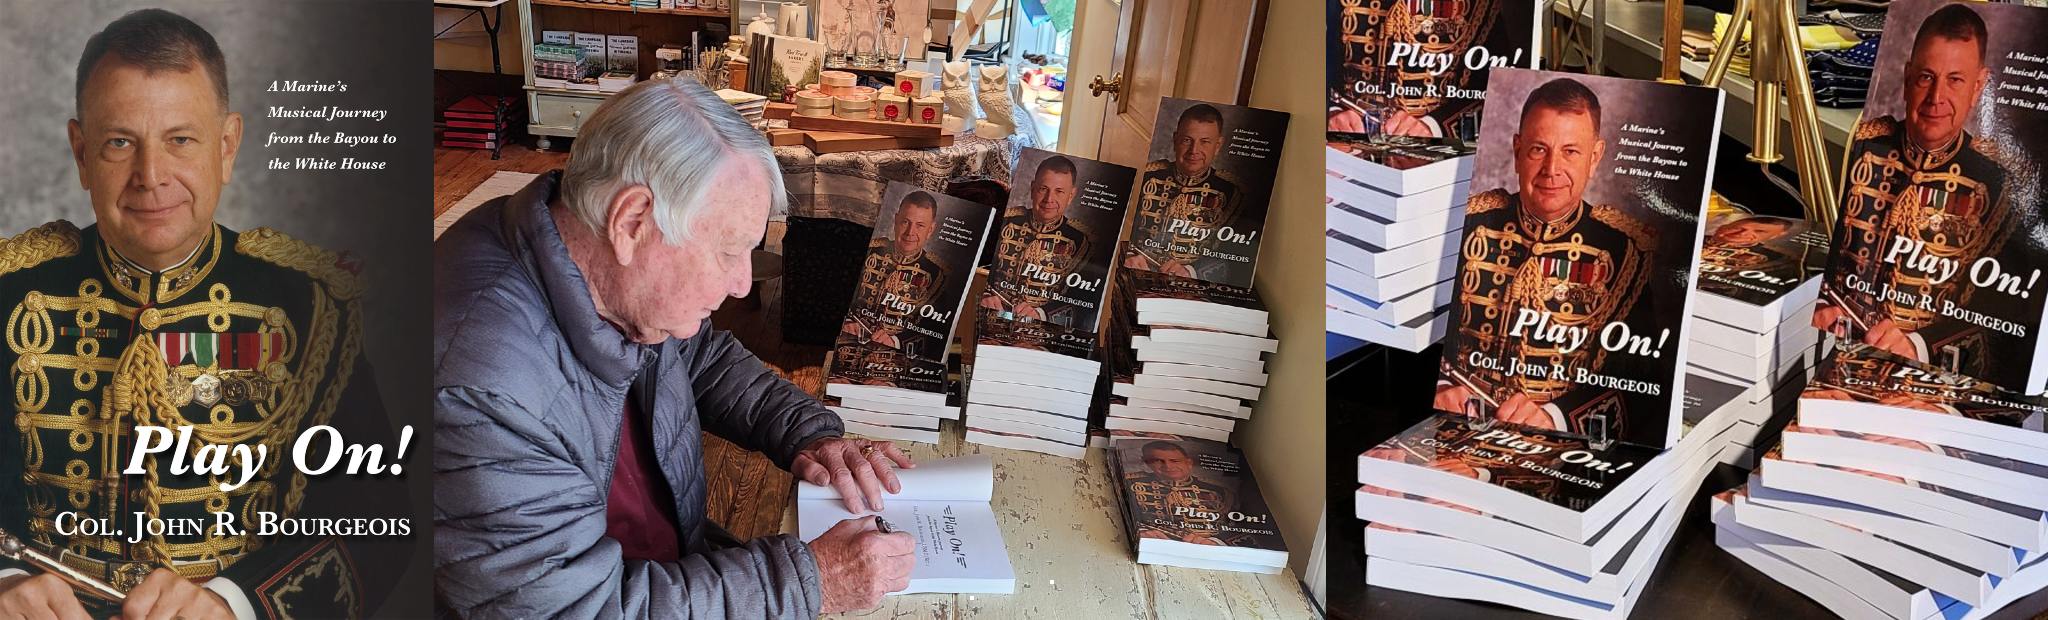 book-signing-banner-image